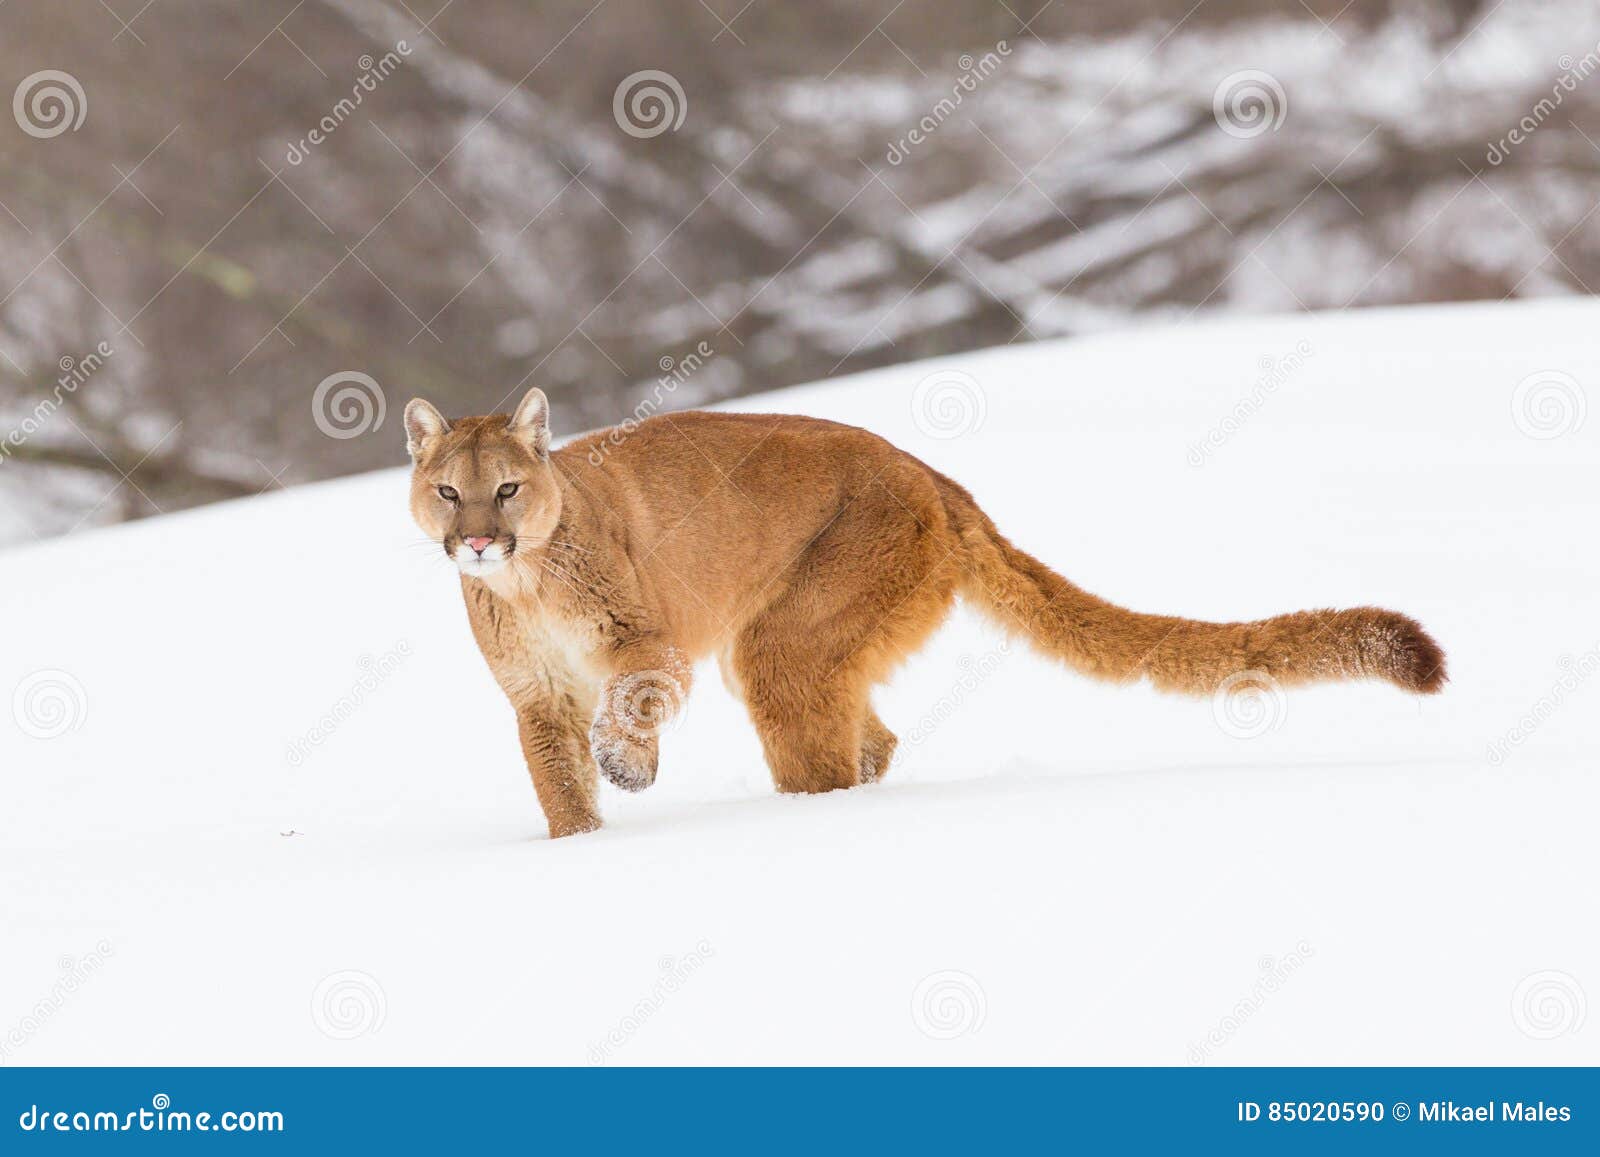 mountain lion with long tail